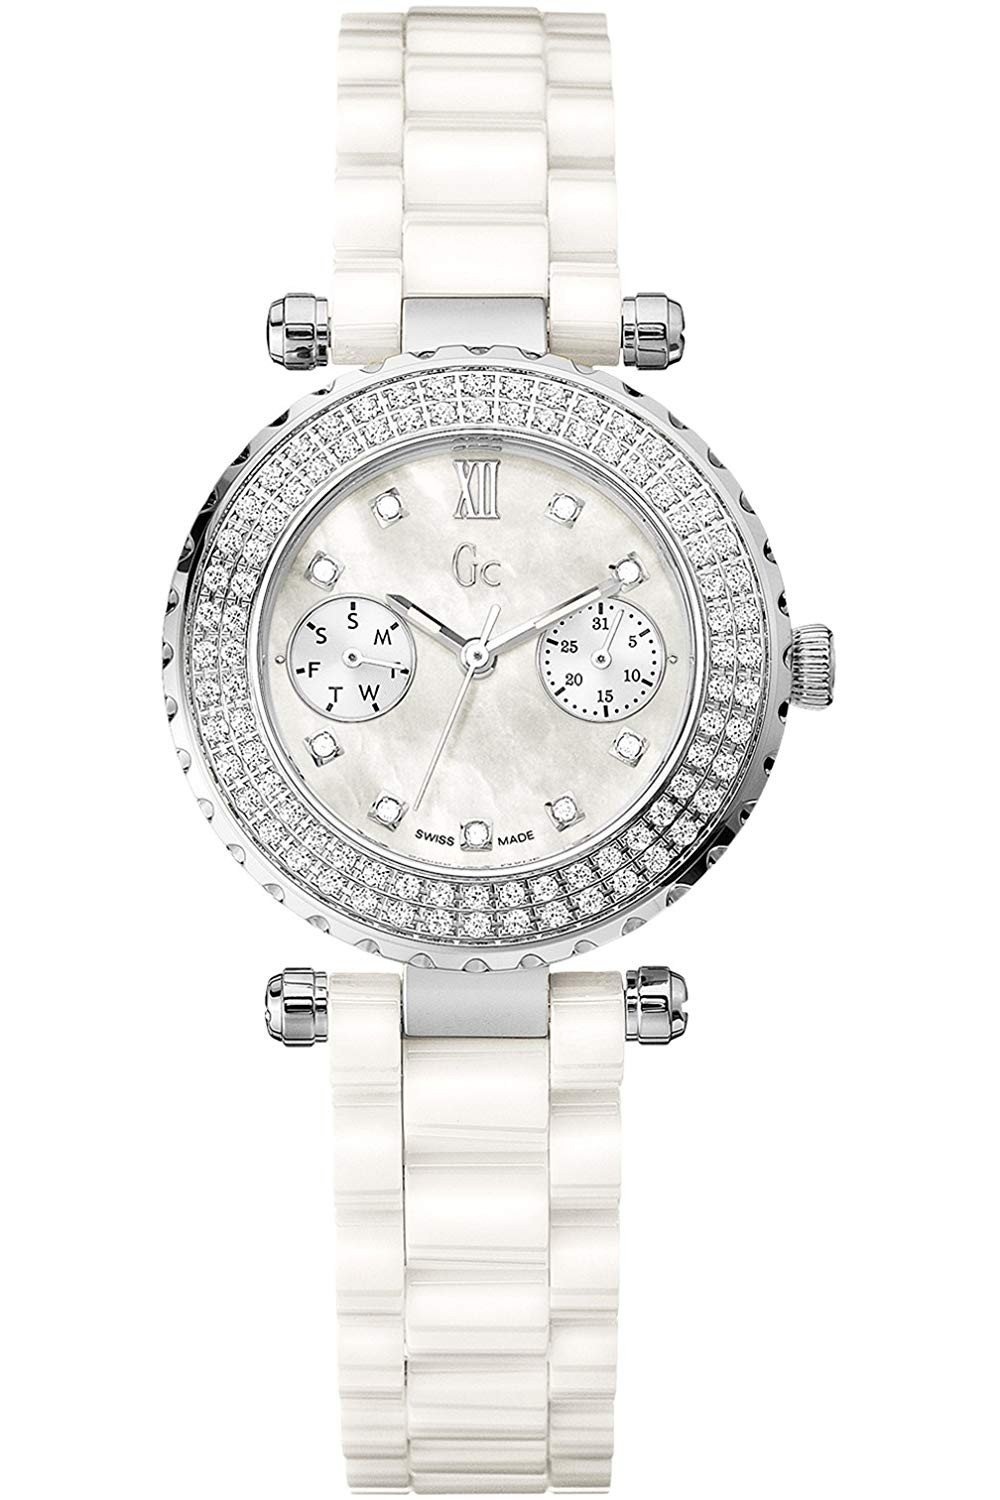 Guess Collection - Montre Diver Chic 97 DIamonds A28101L1 blanche -  WatchPlaza